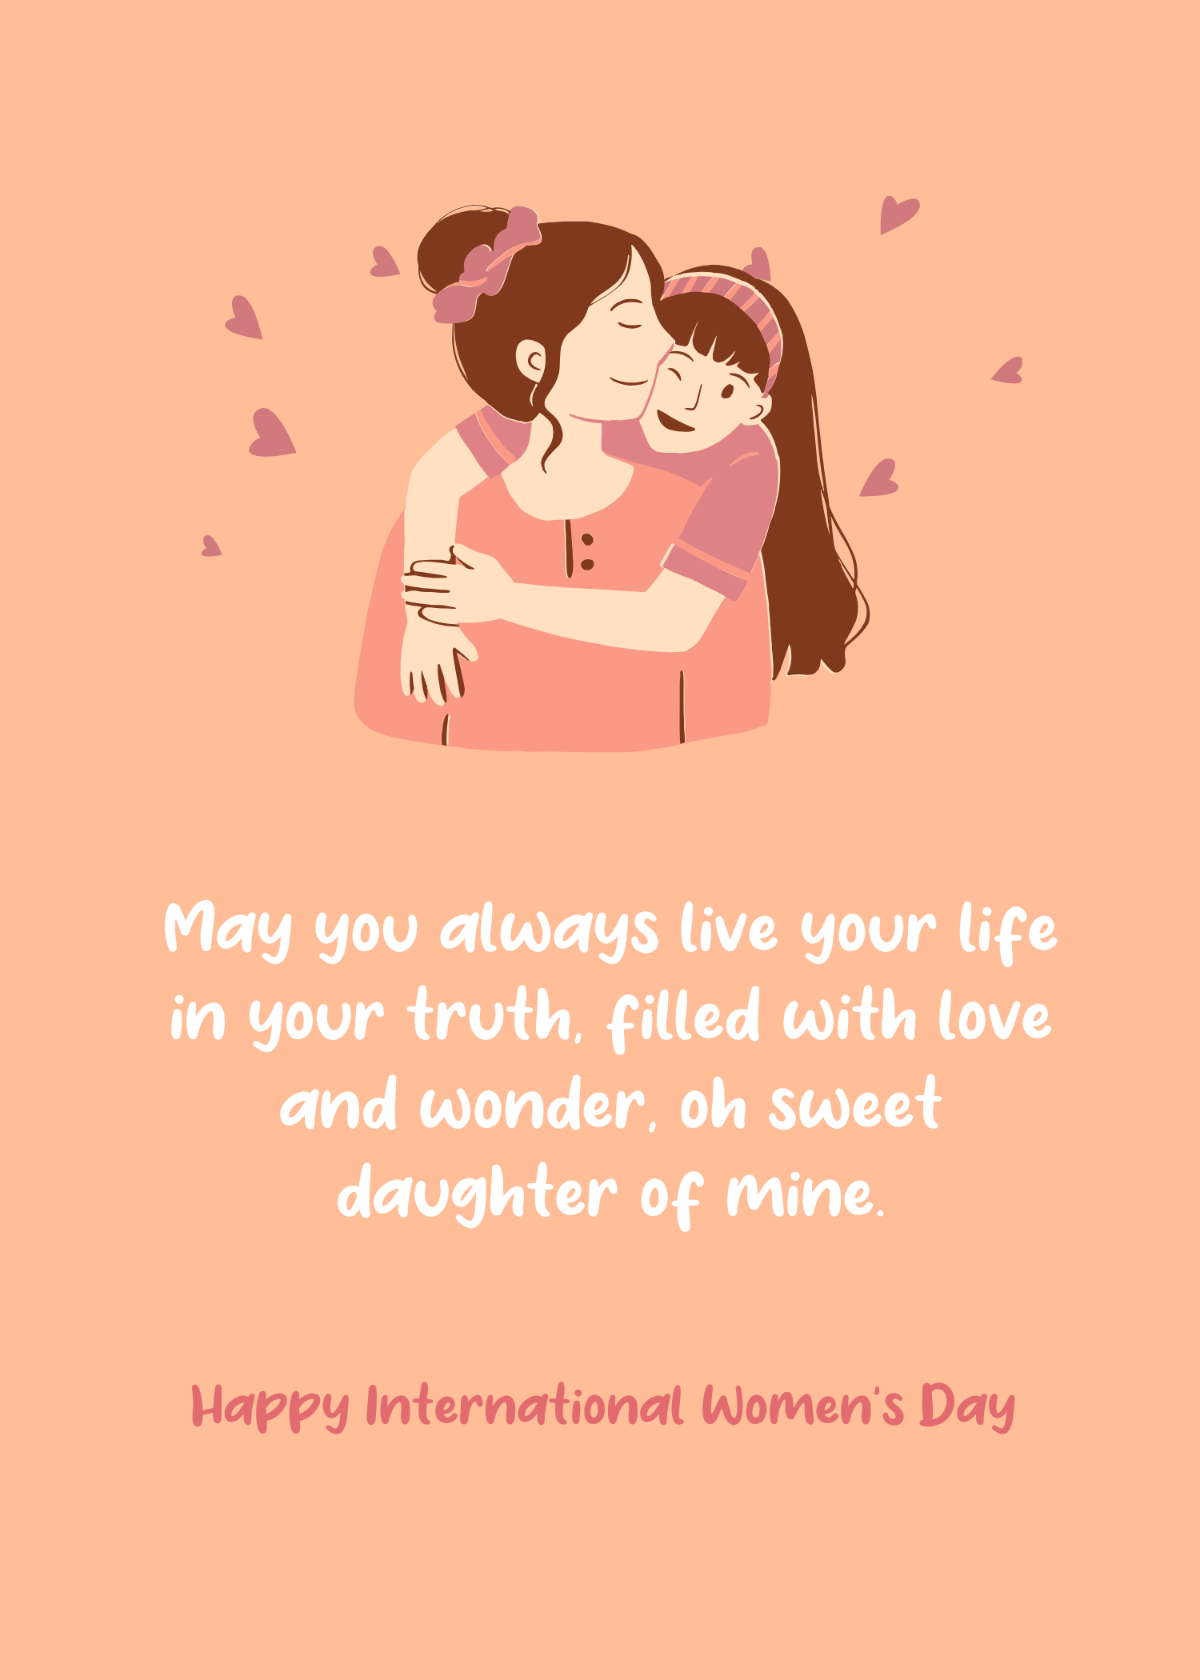 Happy International Women's Day Message to Daughter Template